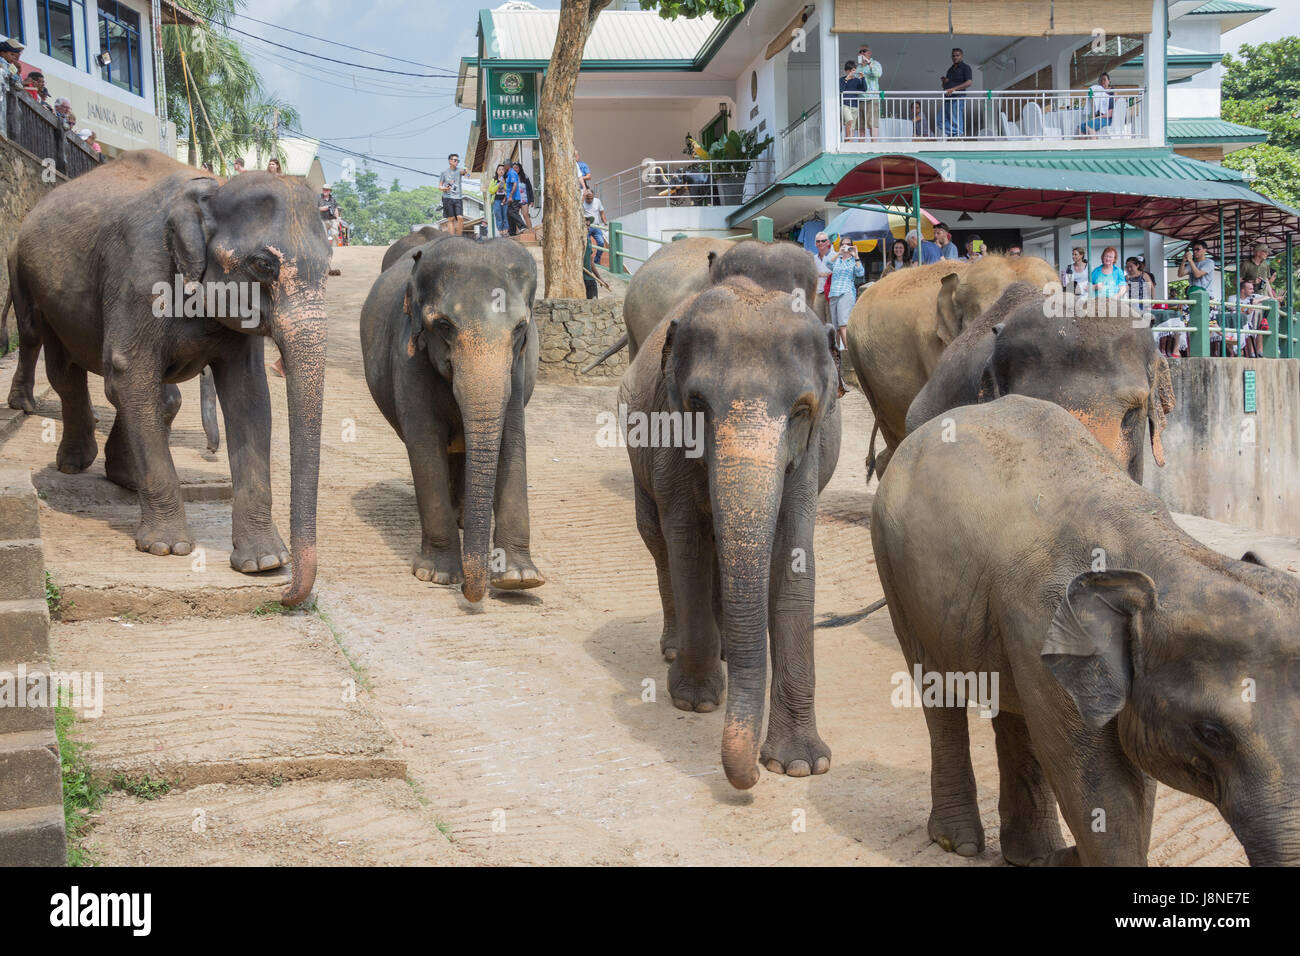 Editorial: PINNAWALA, SRI LANKA, April 7, 2017 - Elephant herd marching through the streets of Pinnawala, surrounded by tourists Stock Photo